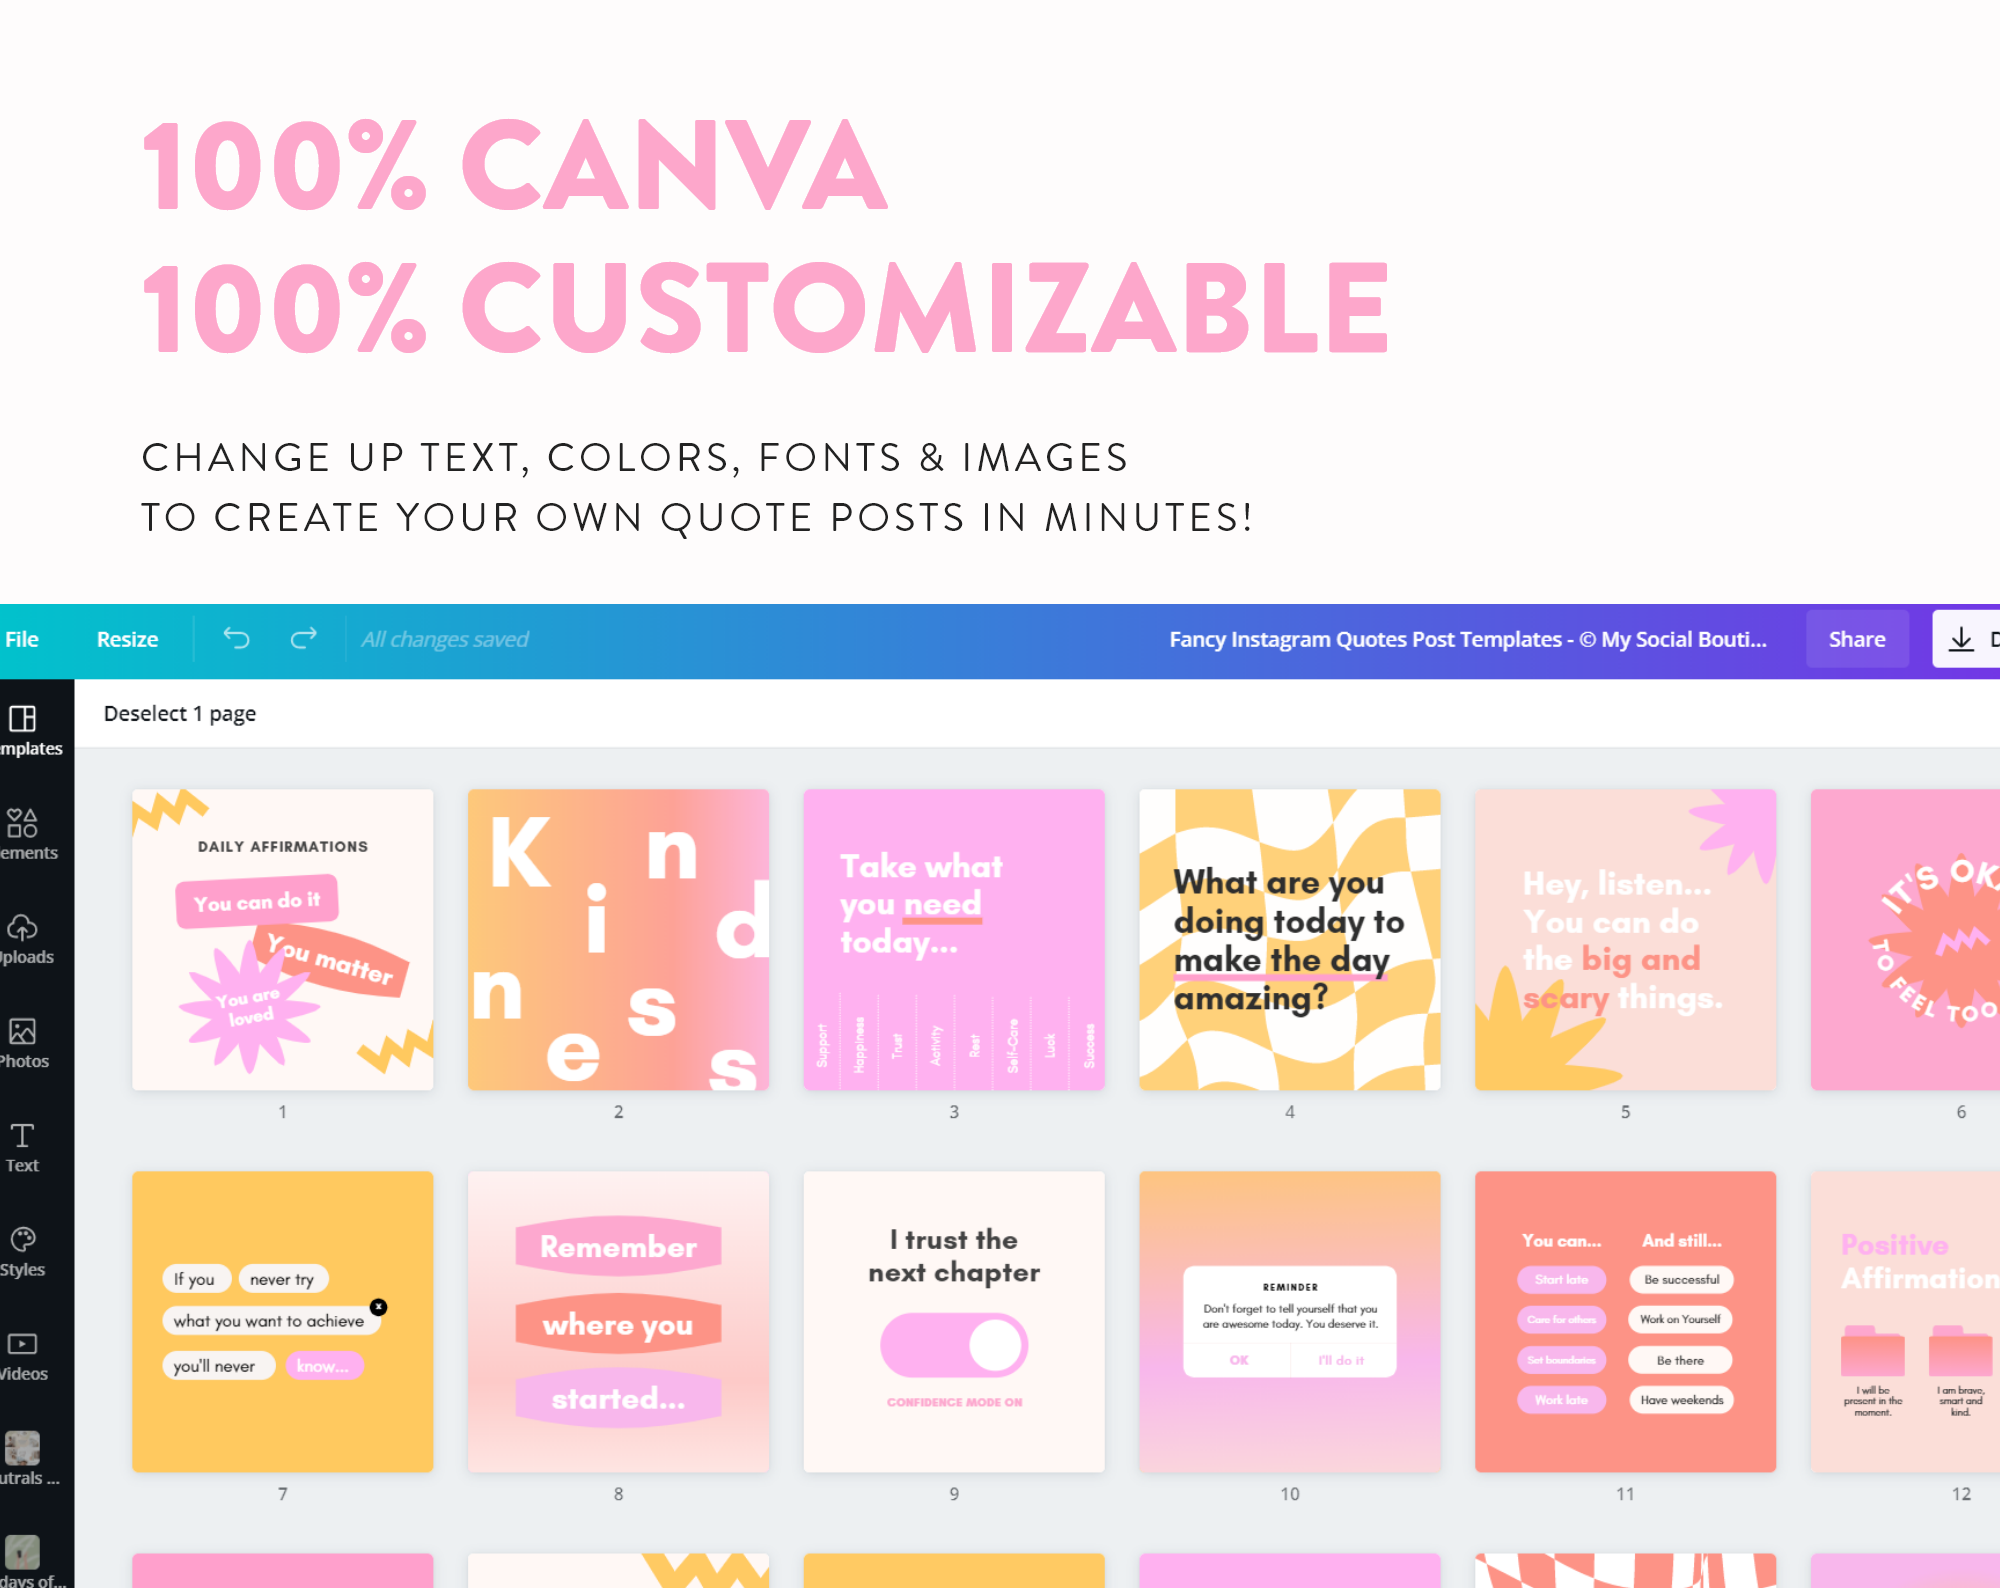 Fancy-quotes-for-instagram-template-pack-canva-customizable-6